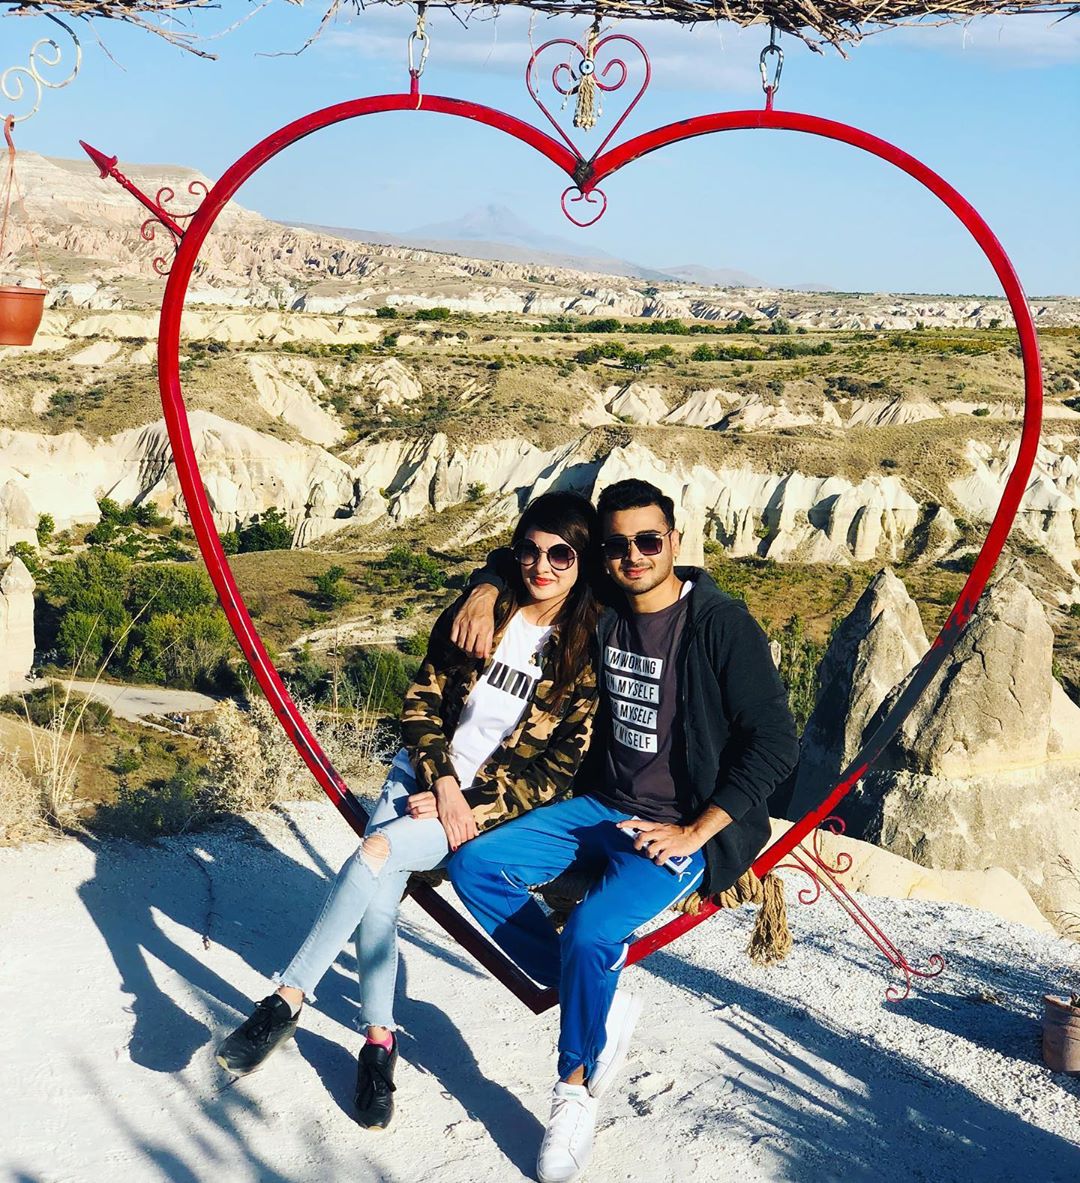 Awesome Clicks of Alizeh Tahir with Her Husband in Turkey